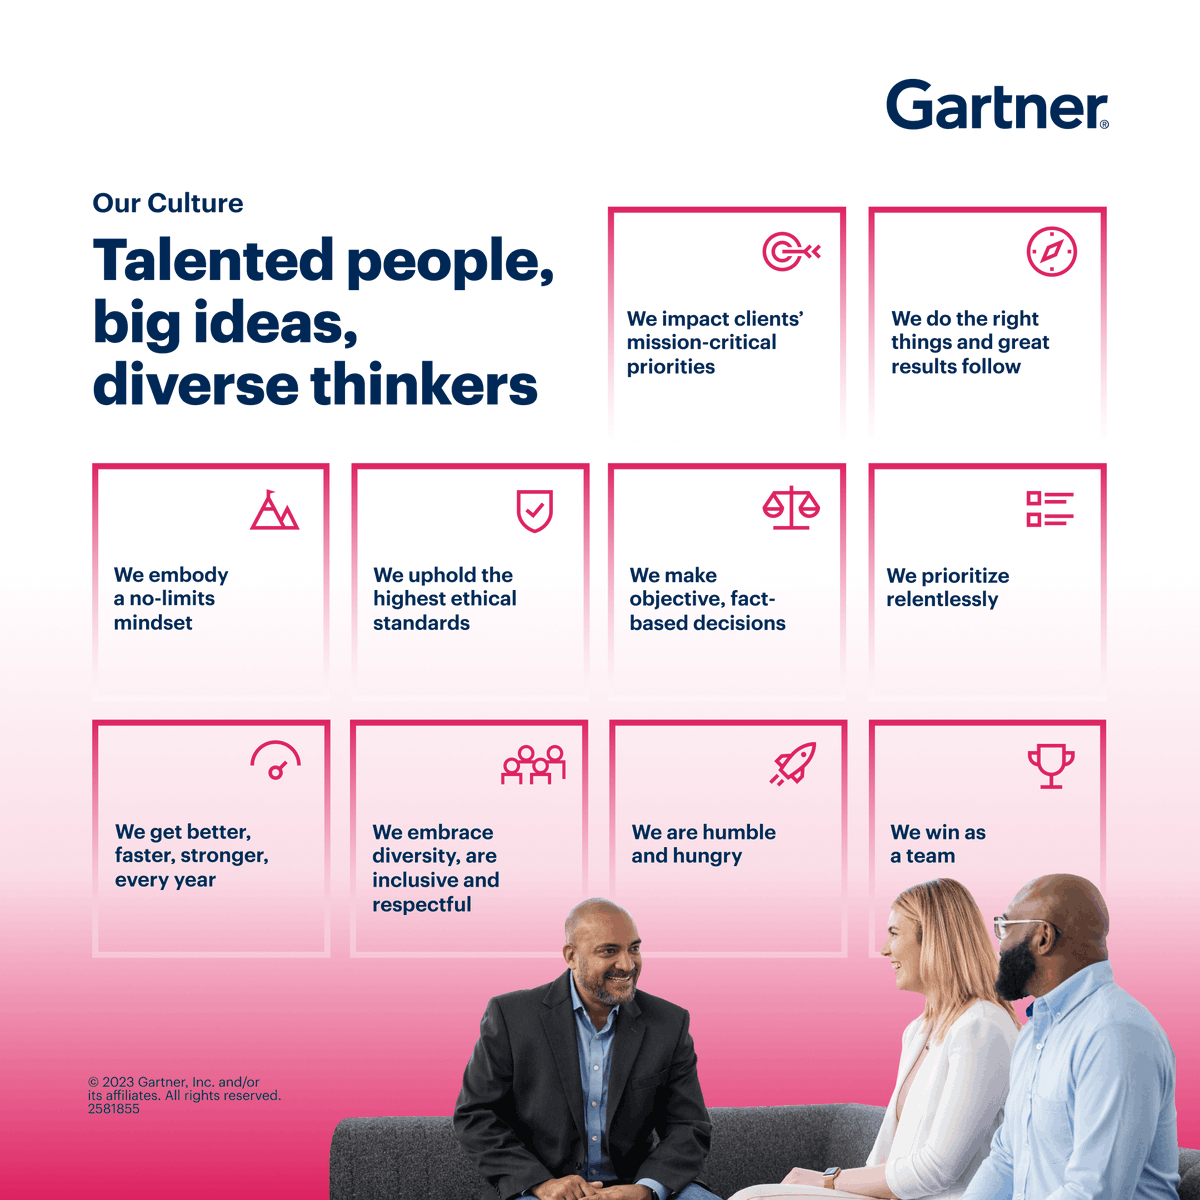 These 10 cultural elements describe the very essence of what makes us special as an organization. Read more about our culture and how we win as a team: gtnr.it/3QSM4Is #LifeAtGartner #Culture #Leadership